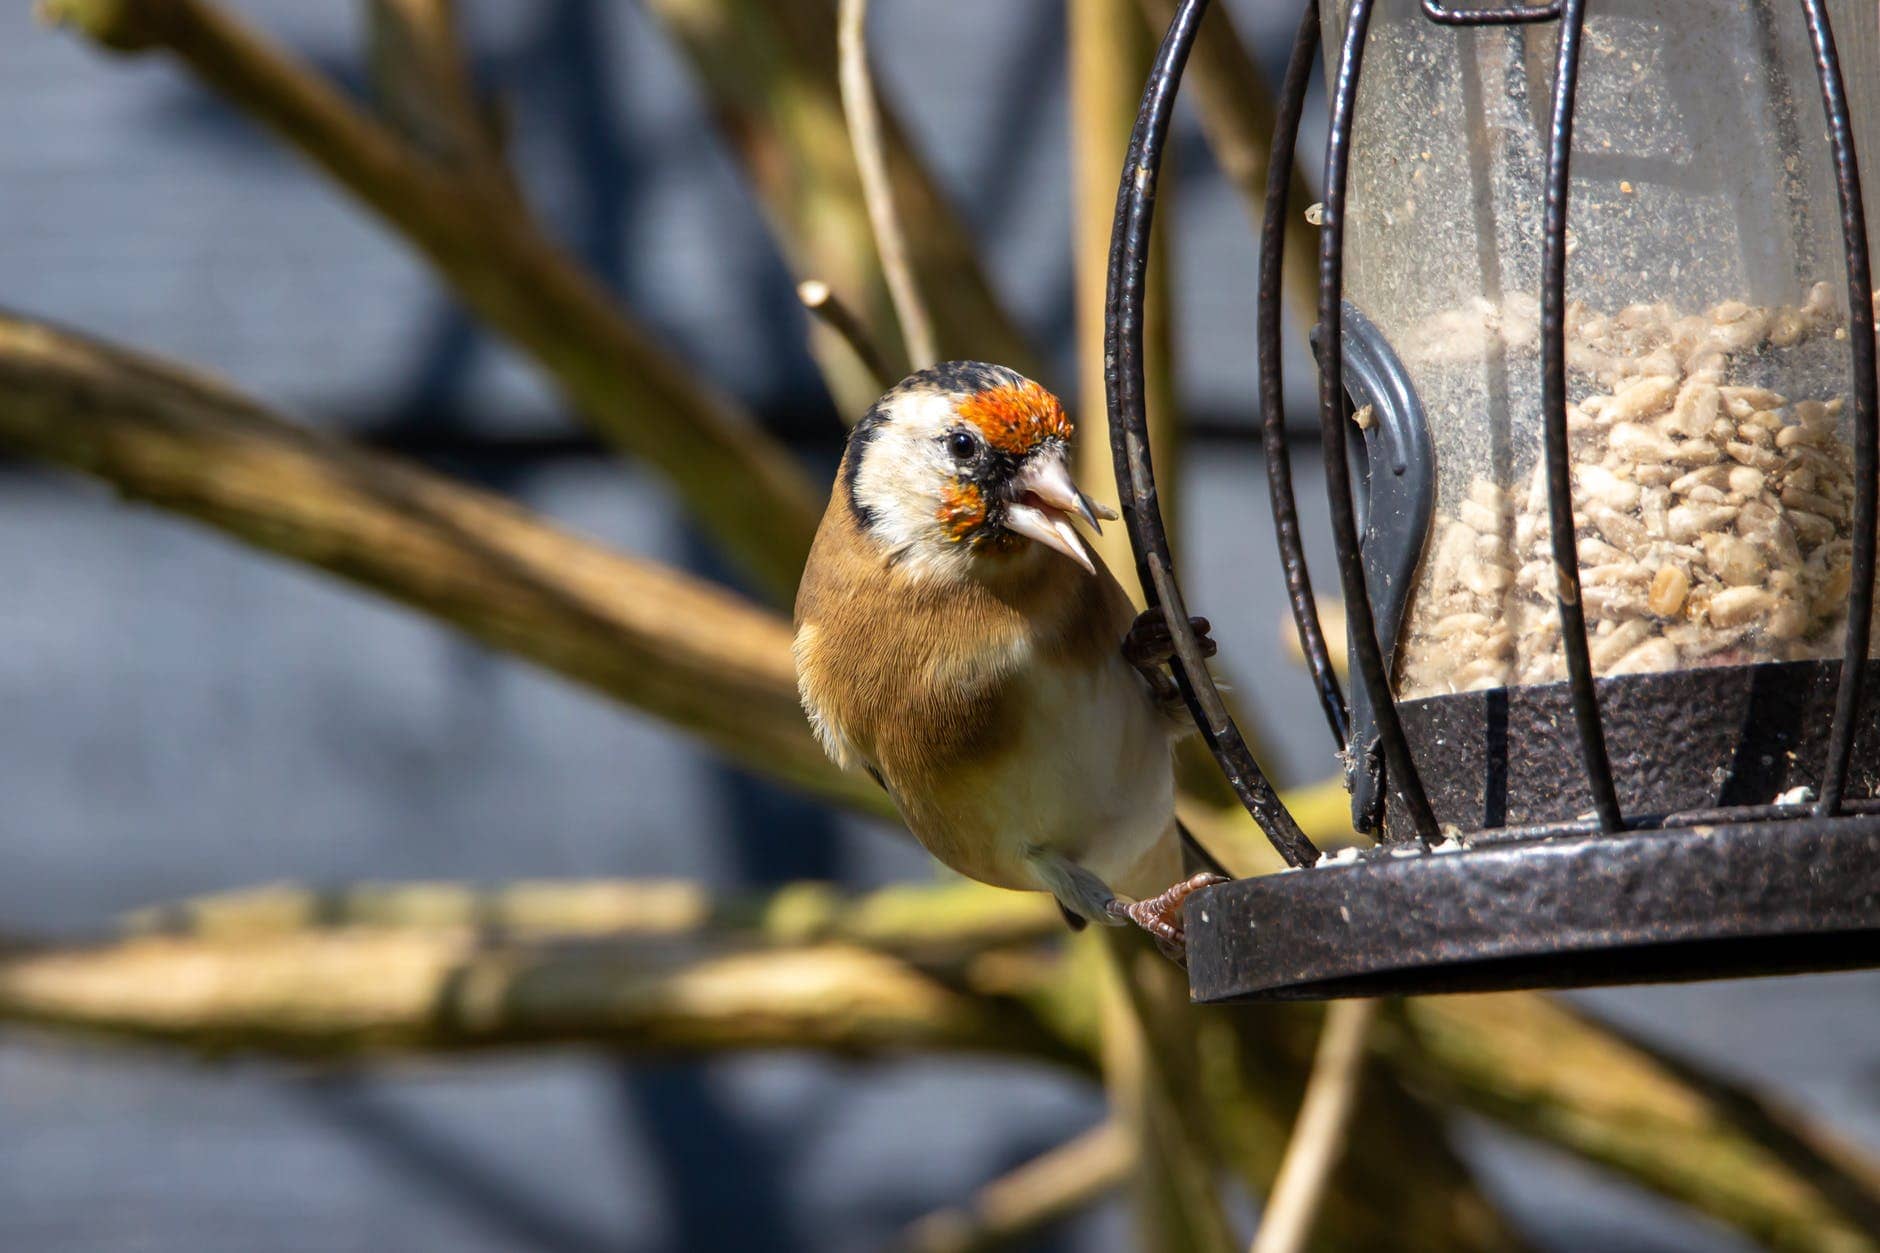 A goldfinch enjoys seed from a bird feeder.

How to help wildlife in a heatwave.